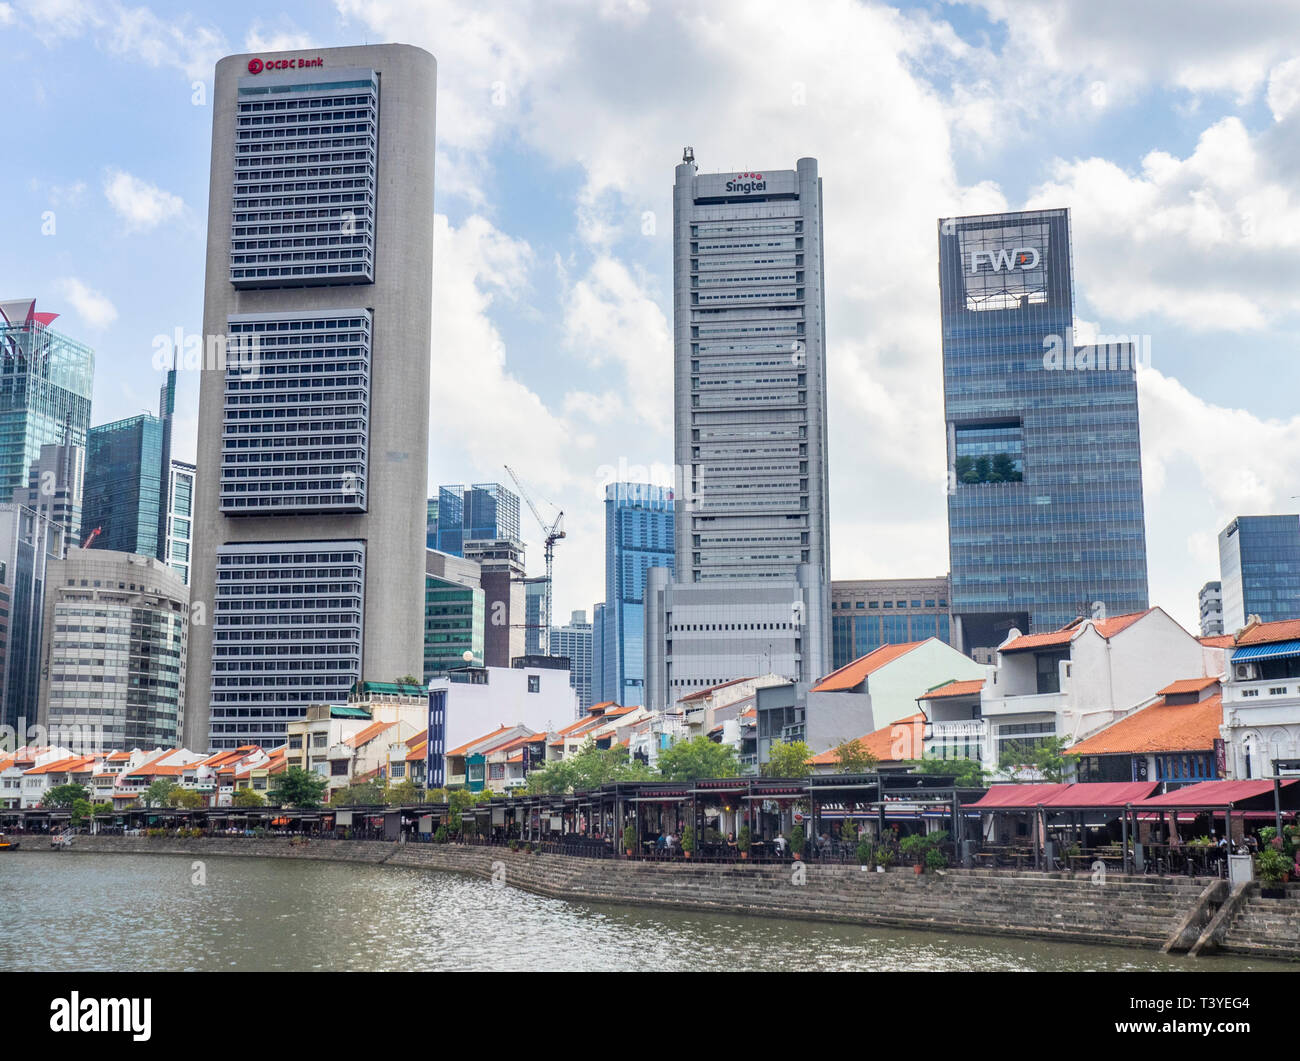 Ocbc Bank High Resolution Stock Photography And Images Alamy